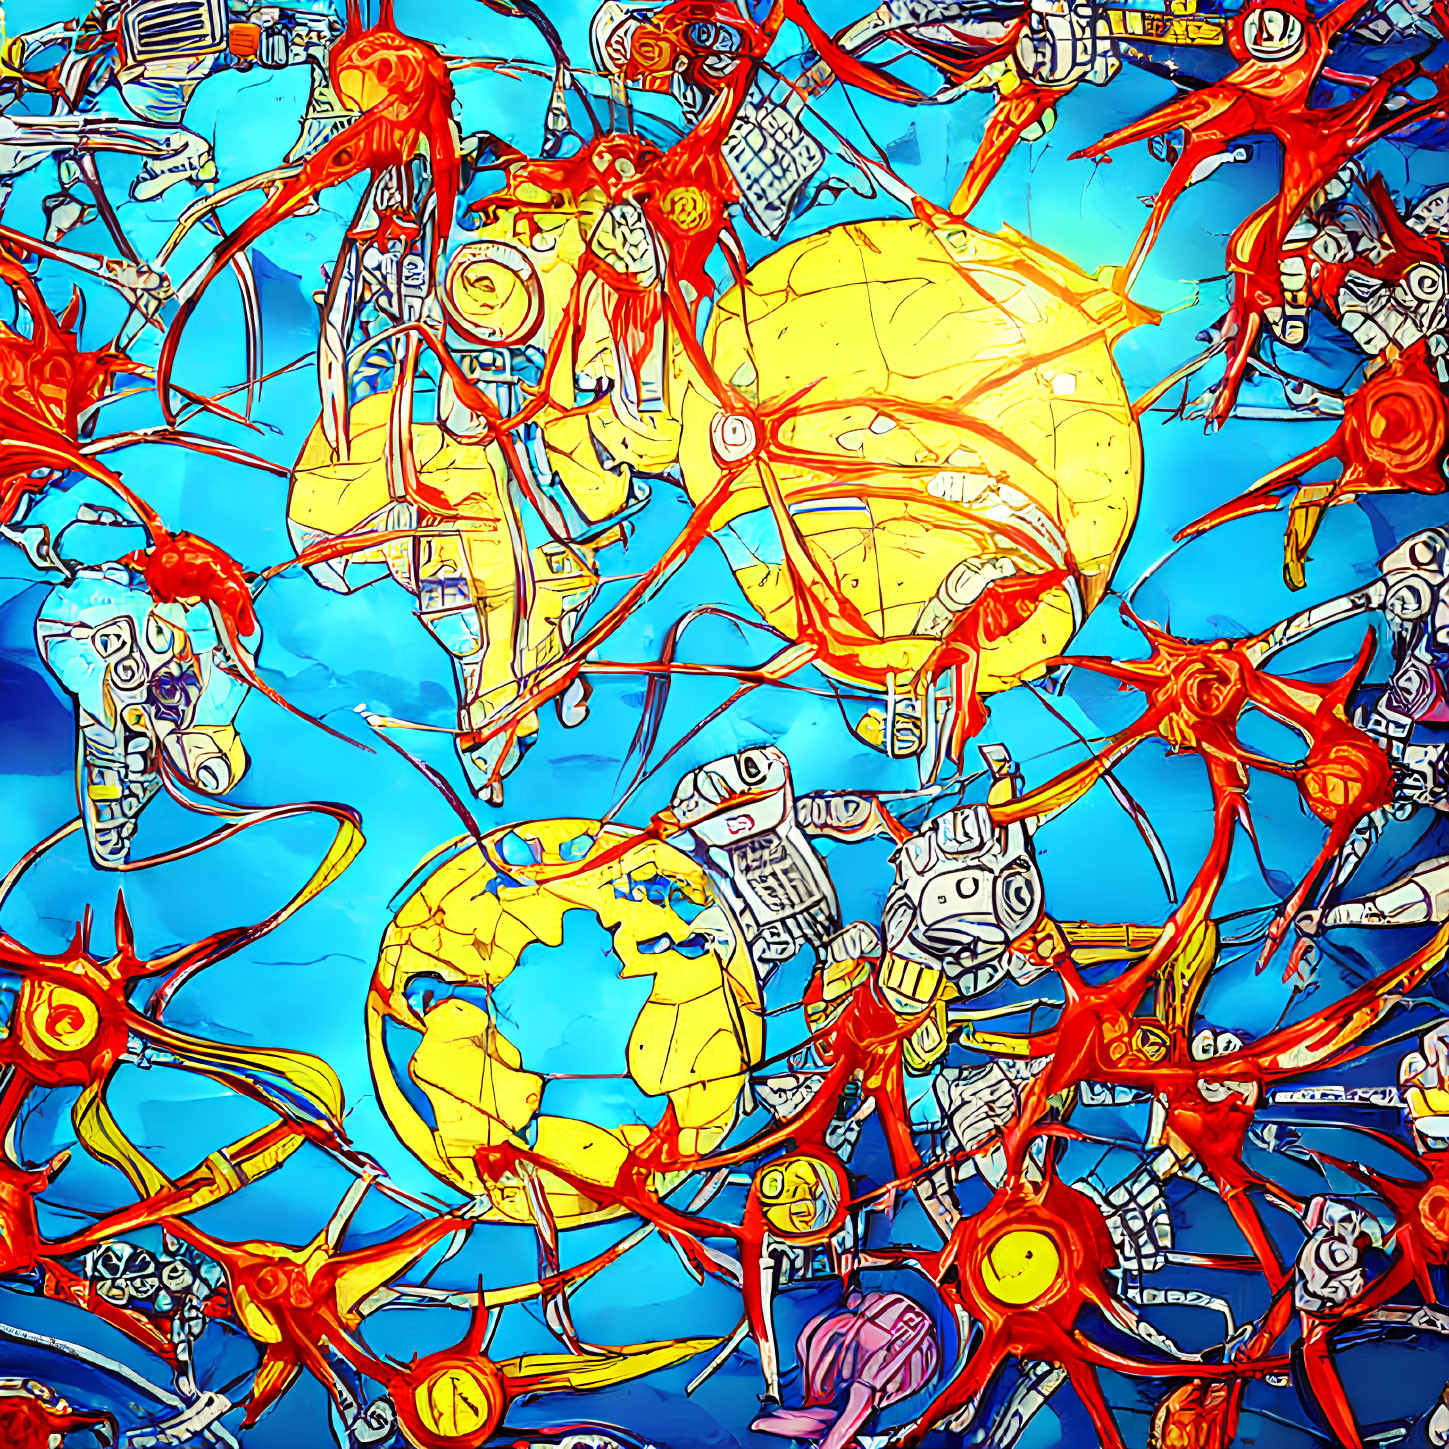 Vibrant Abstract Art: Red, Yellow Organic Shapes with Blue Robotic Figures